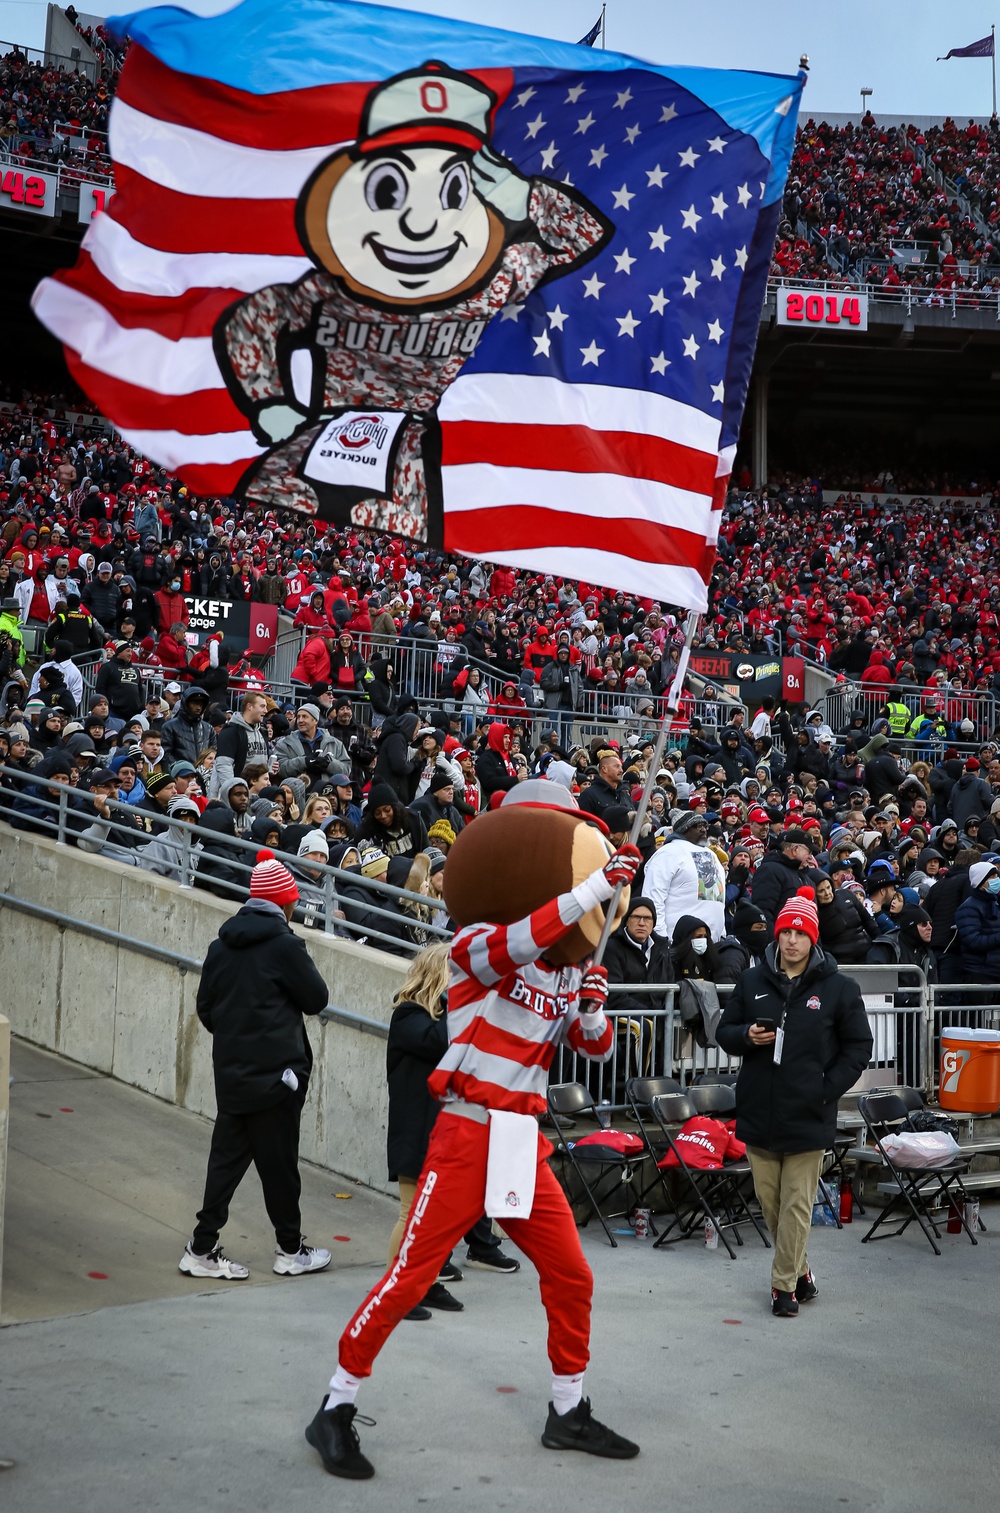 Ohio National Guardsmen, recruits, and veterans honored at OSU Military Appreciation Game